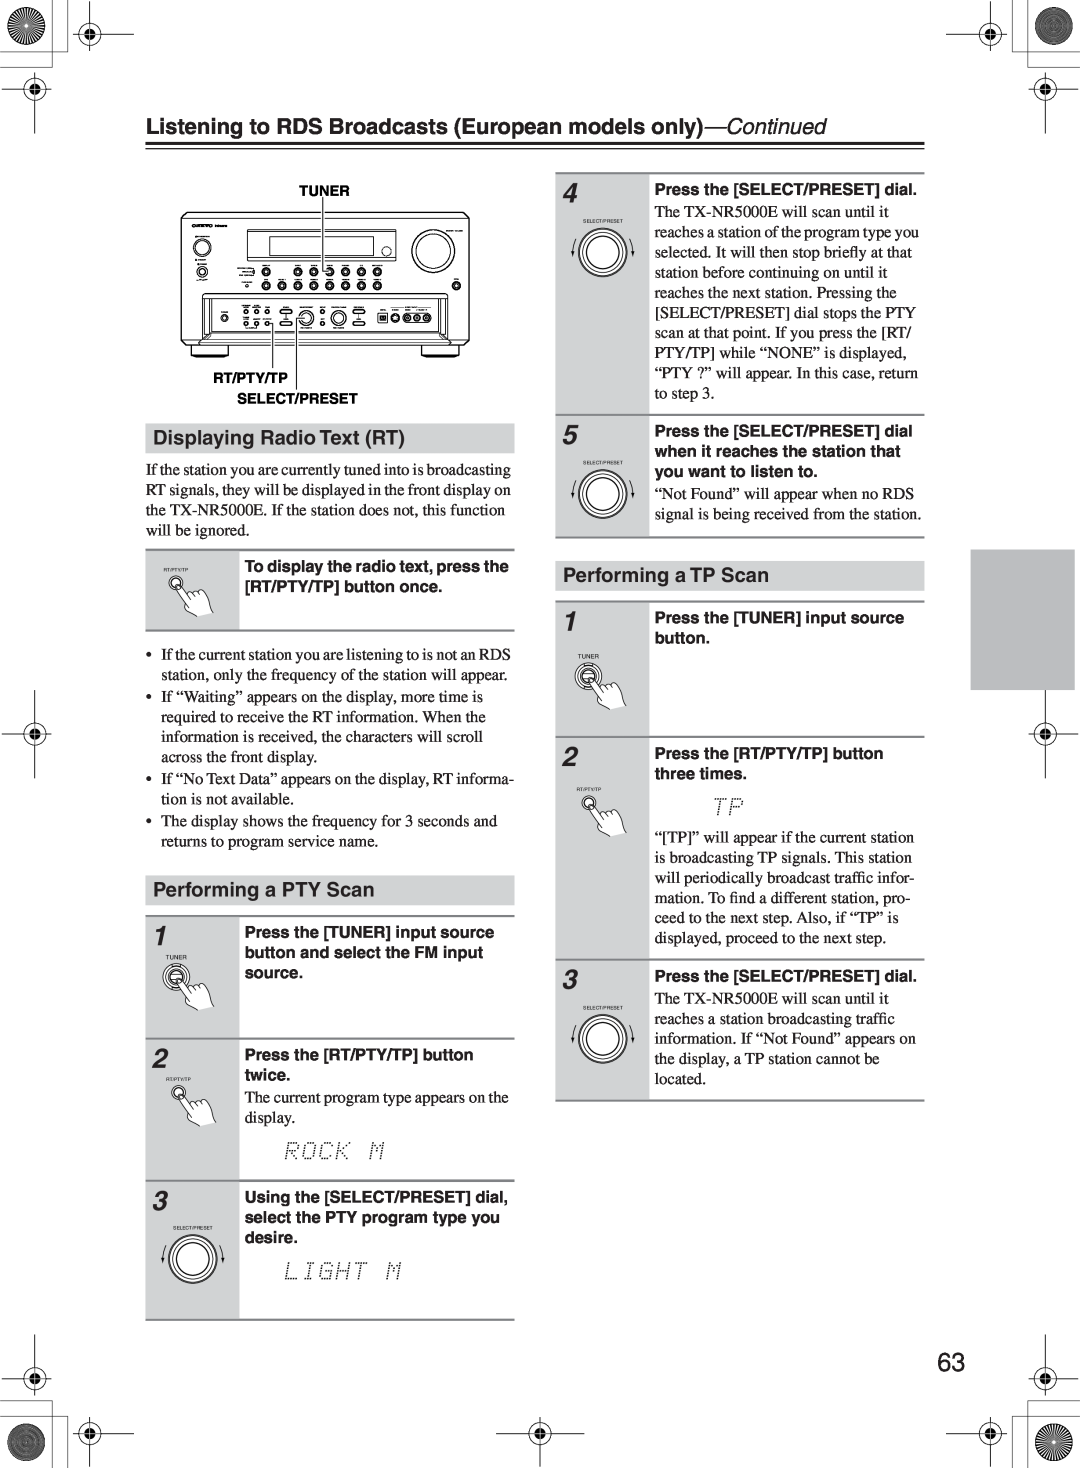 Onkyo TX-NR1000 instruction manual Displaying Radio Text RT, Performing a PTY Scan, Performing a TP Scan, display 